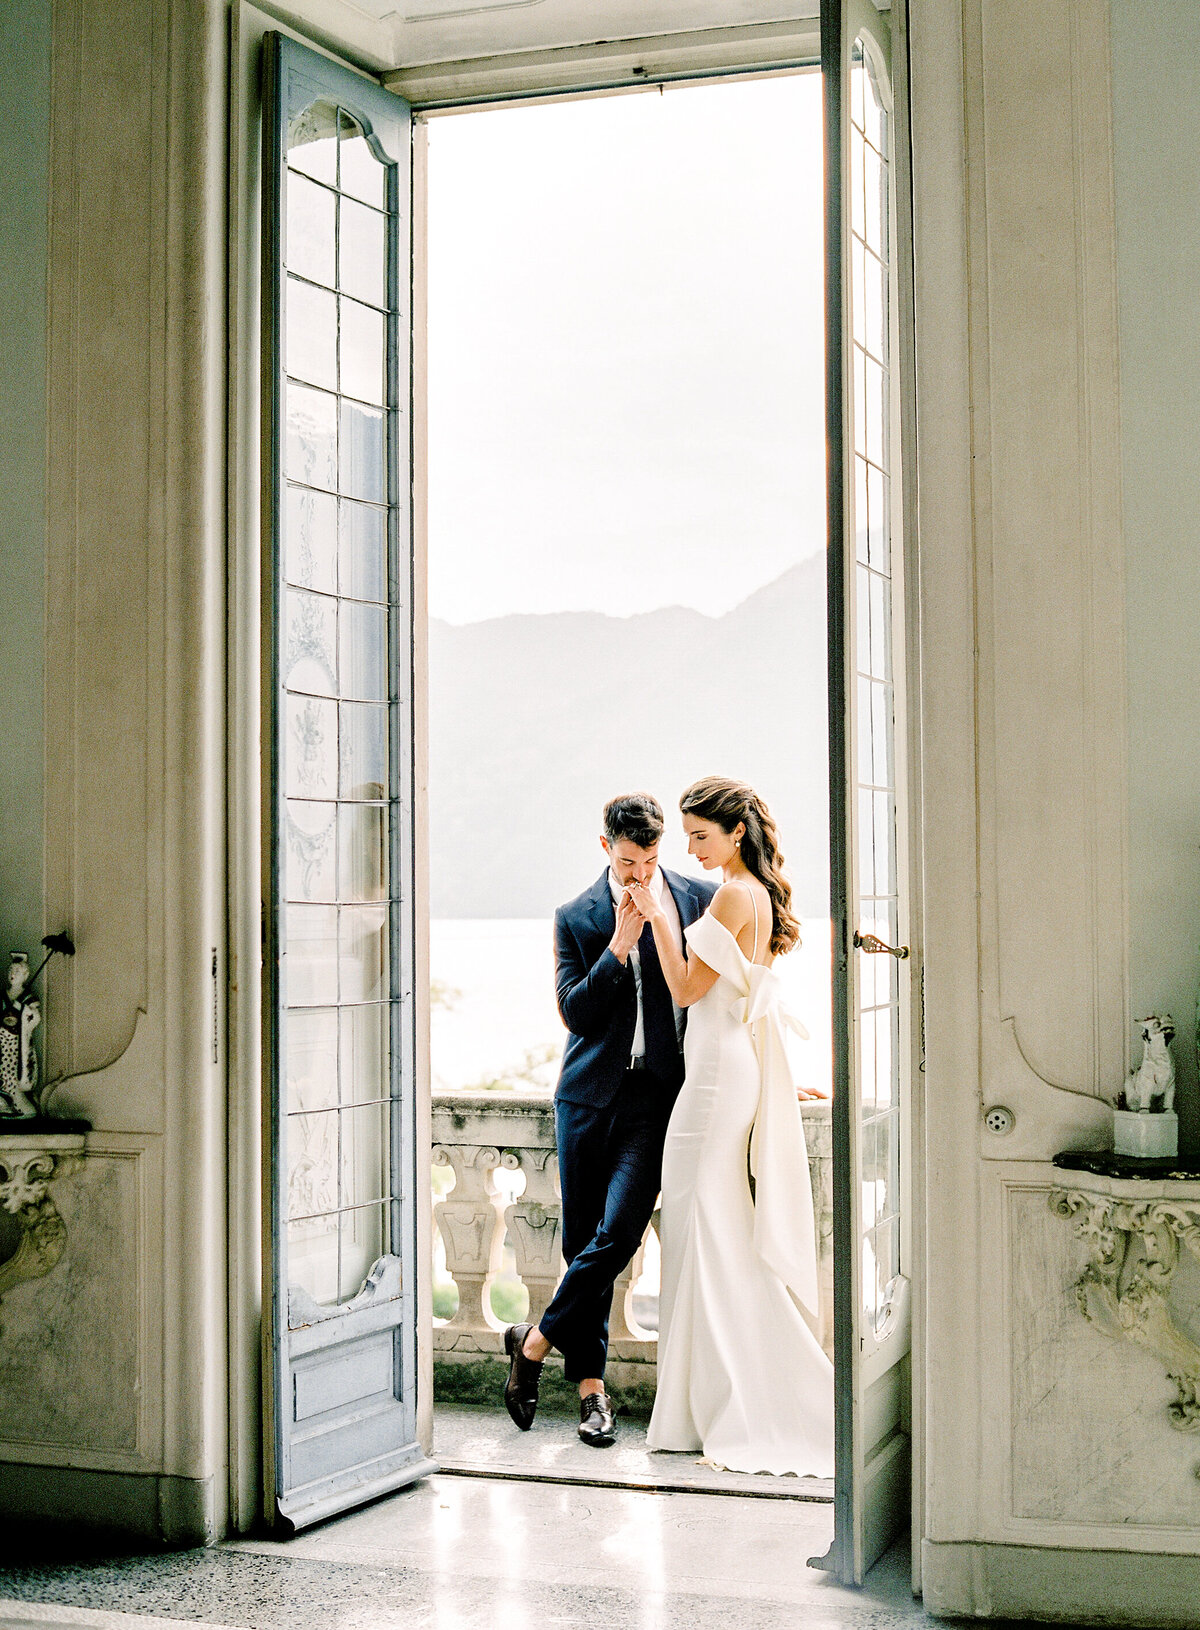 Bride and groom in an intimate moment on the balcony of Villa Sola Cabiati on Lake Como bride in an off the shoulder wedding dress with oversized bow in the back and groom in navy suit during their Lake Como wedding photographed by Italy wedding photographer